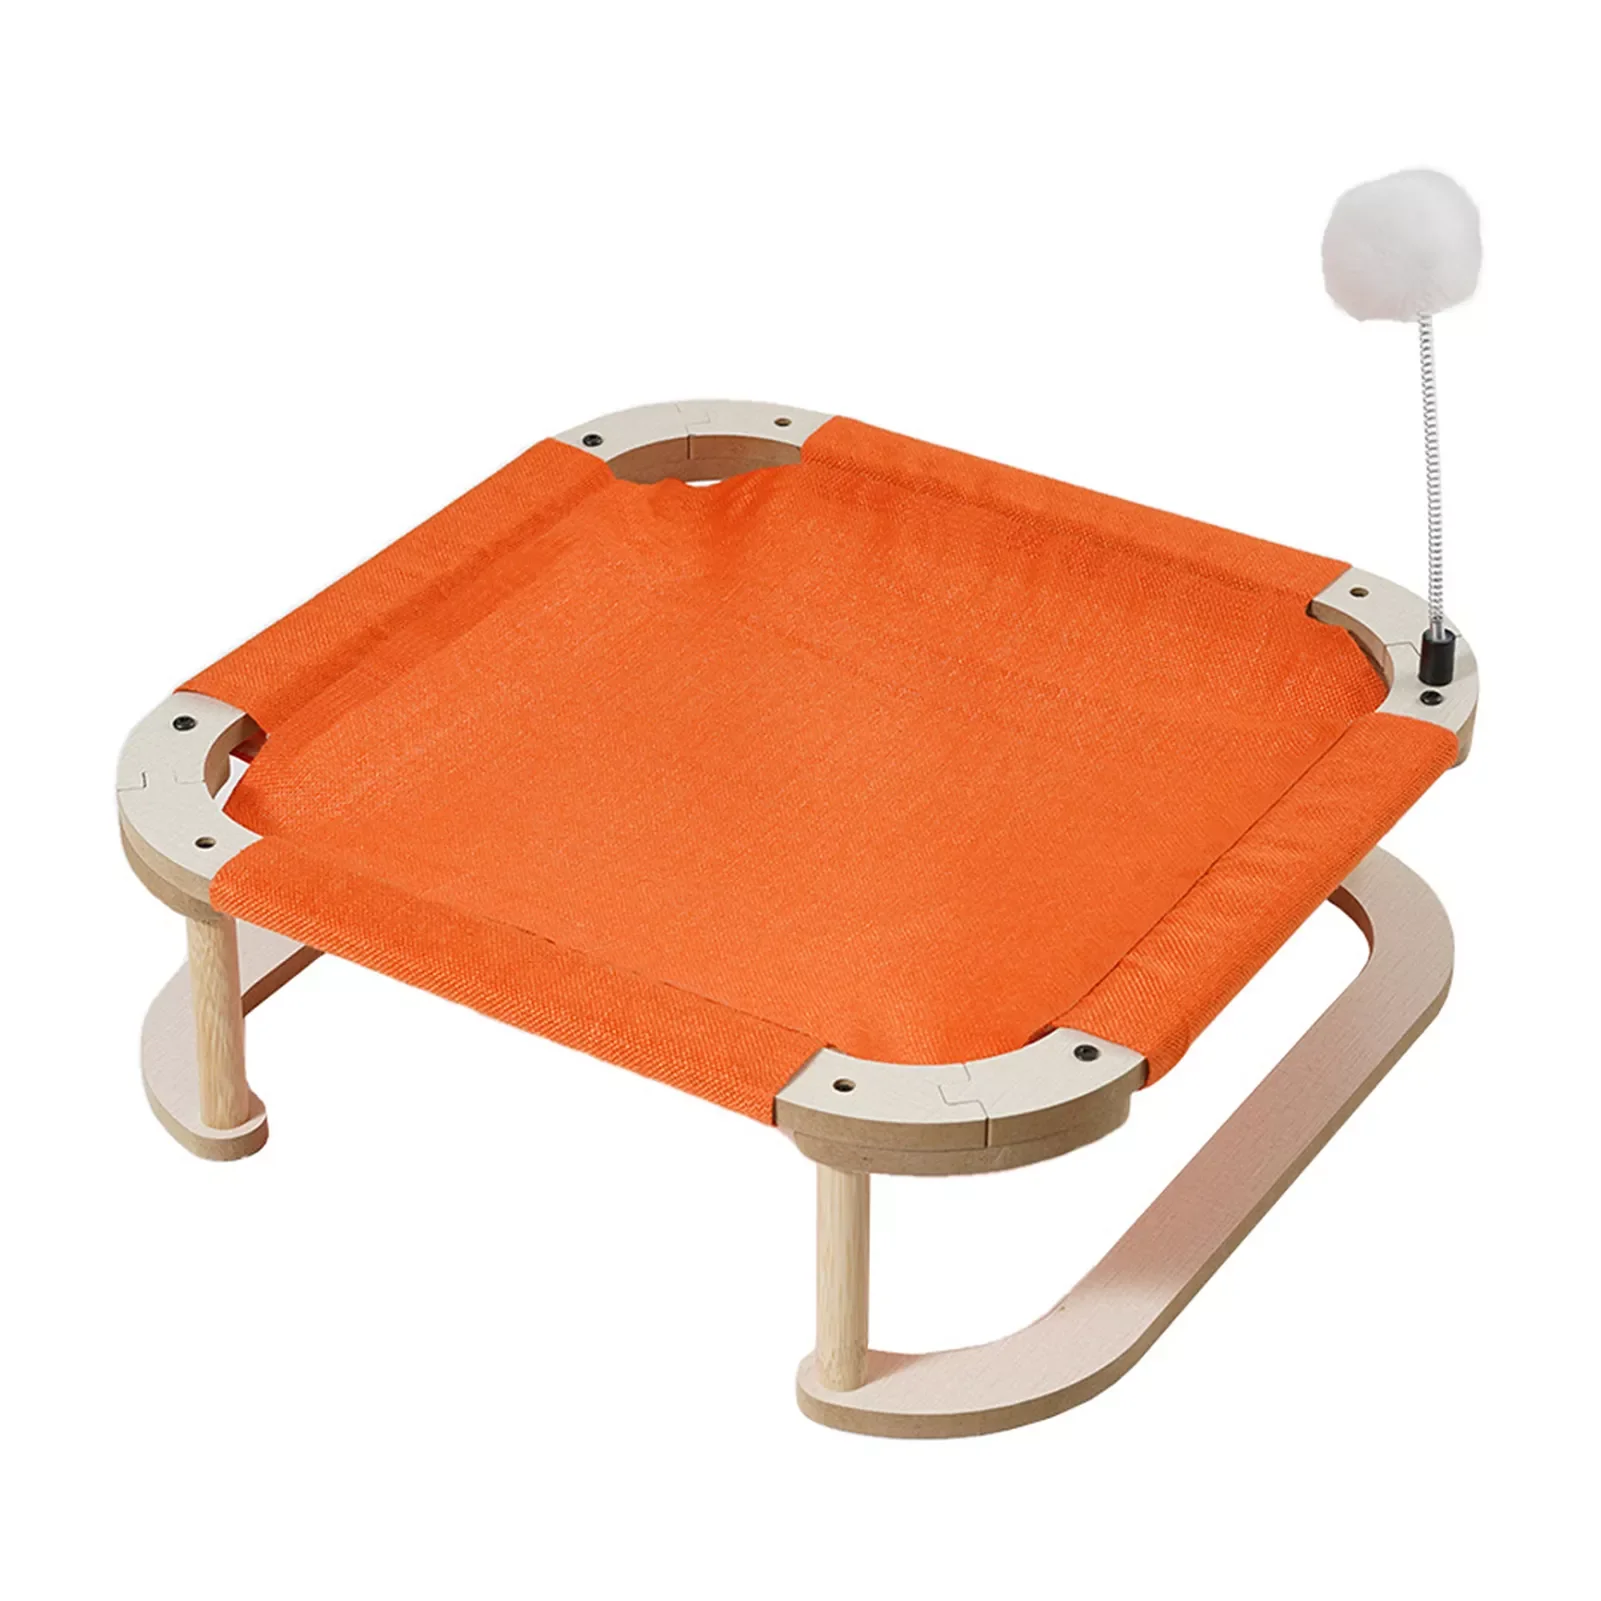 

Detachable Hammock Bed Pet House For Dogs Puppy Lazy Cushion Lounger For Pet Cats Kitten Cottages Pet Sleeping Supplies